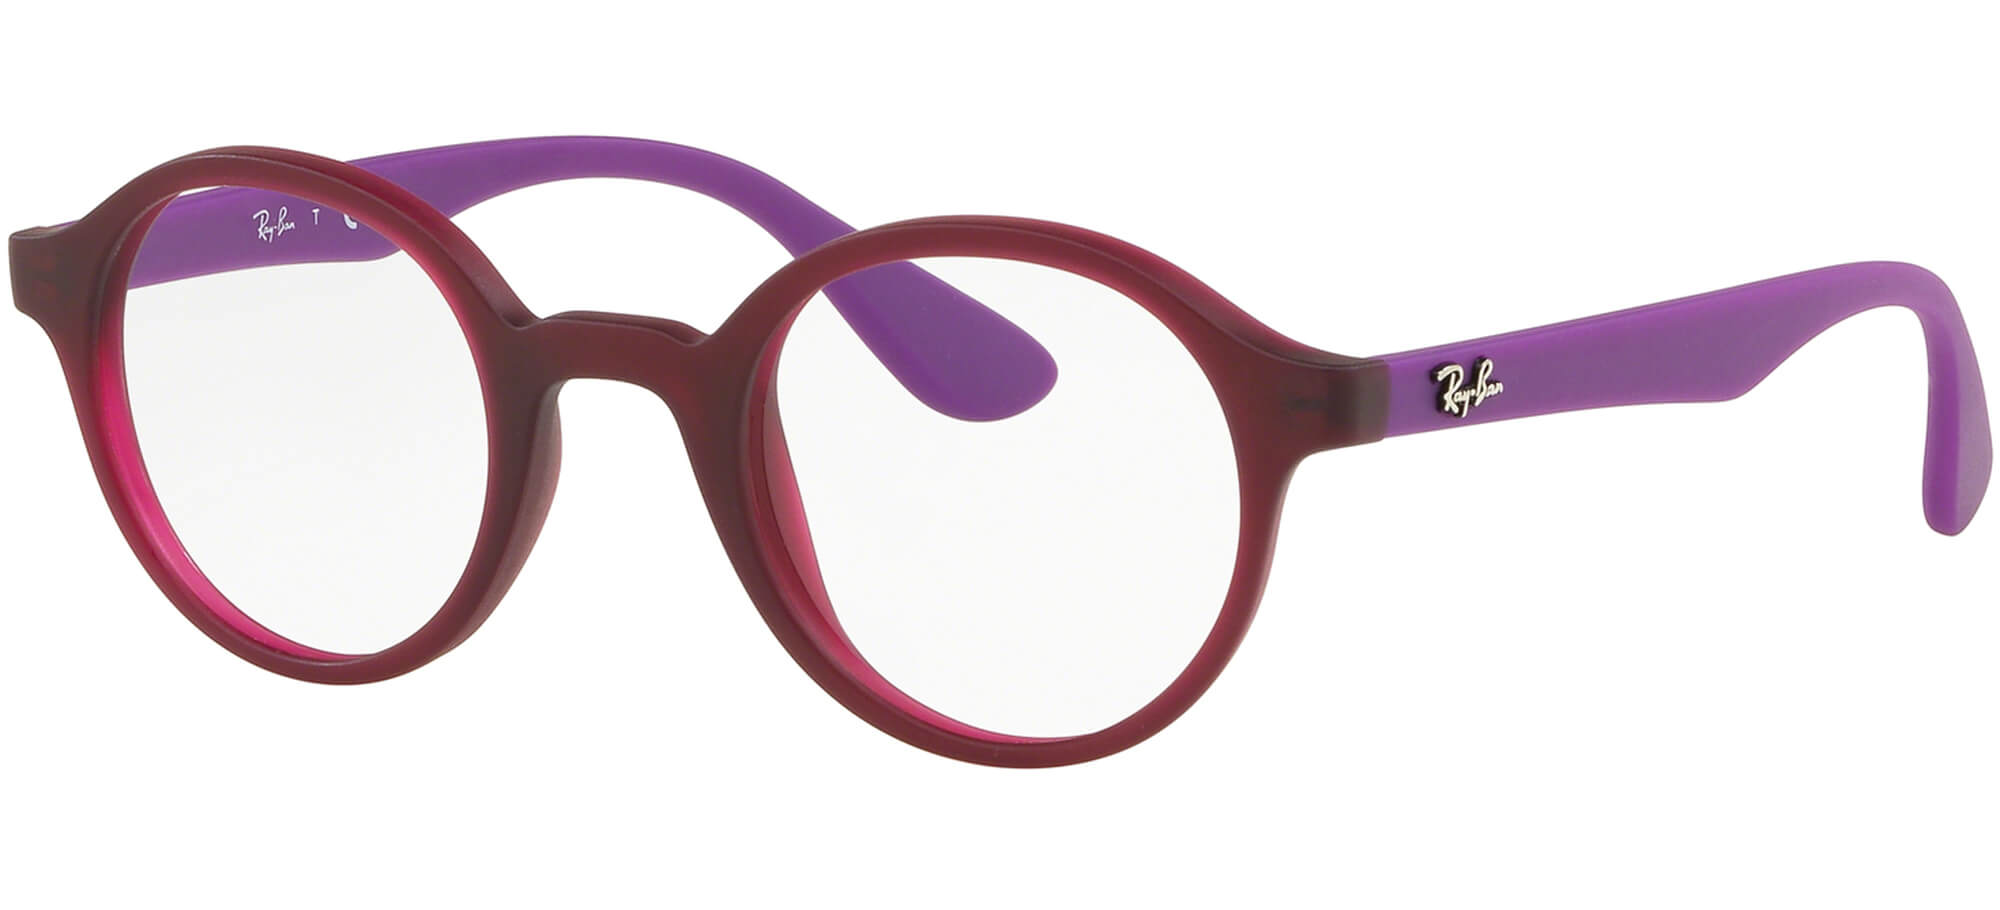 Ray-Ban JuniorRY 1561Red Violet (3782)